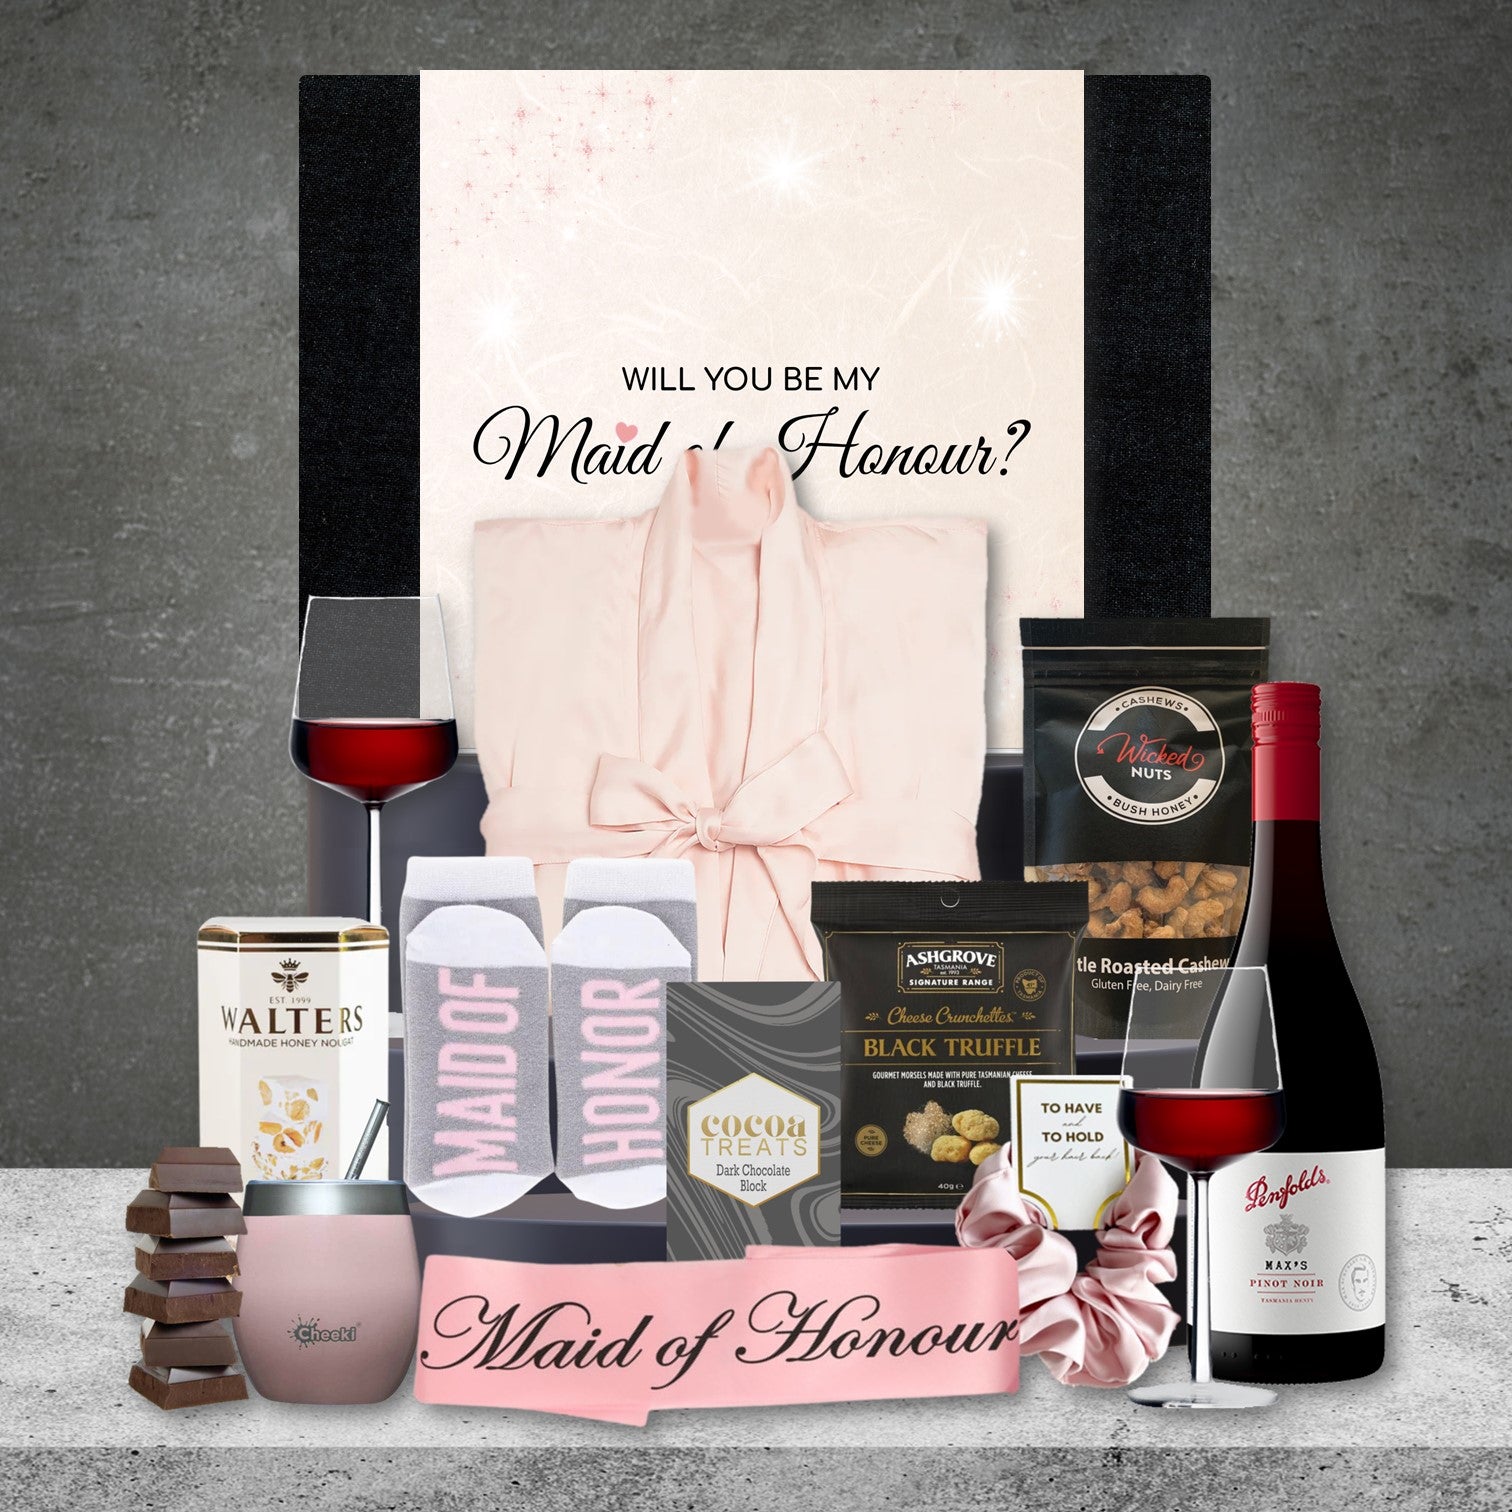 Will You Be My Maid of Honour Hamper